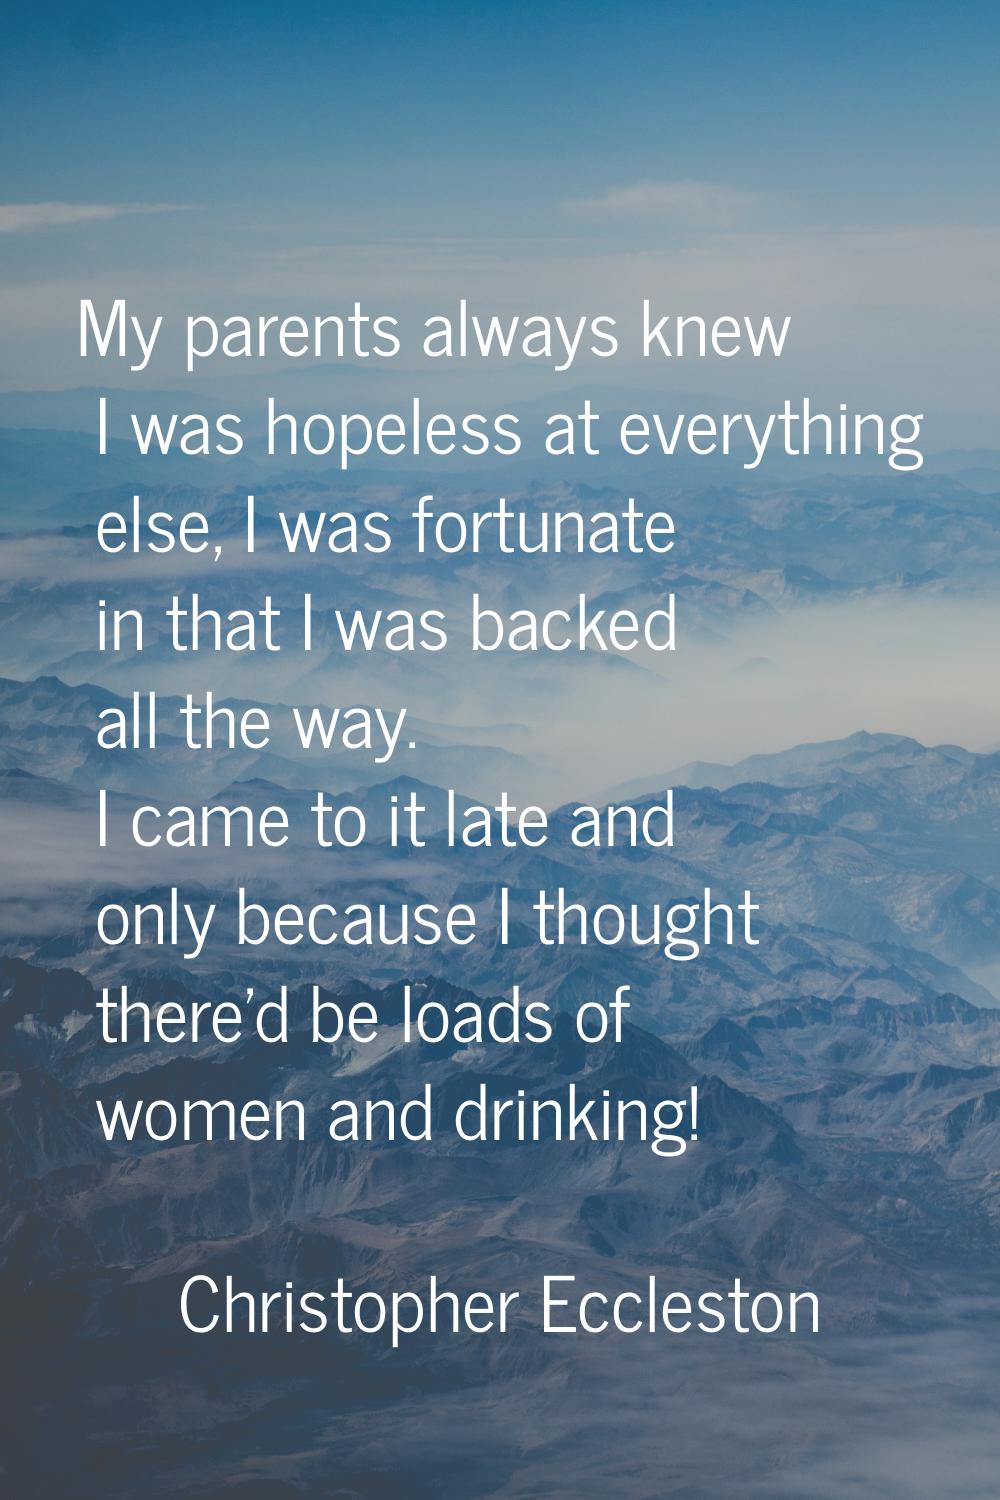 My parents always knew I was hopeless at everything else, I was fortunate in that I was backed all 